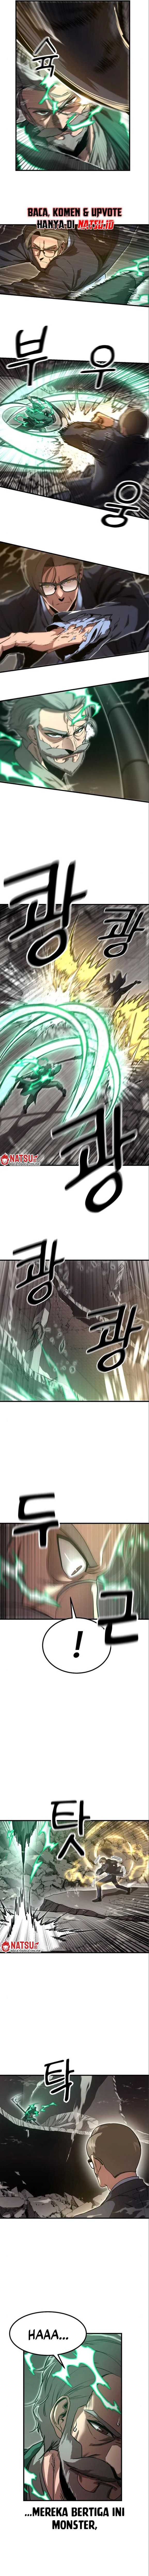 Emperor Of Kings (Emperor With an Inconceivable Heart) Chapter 10